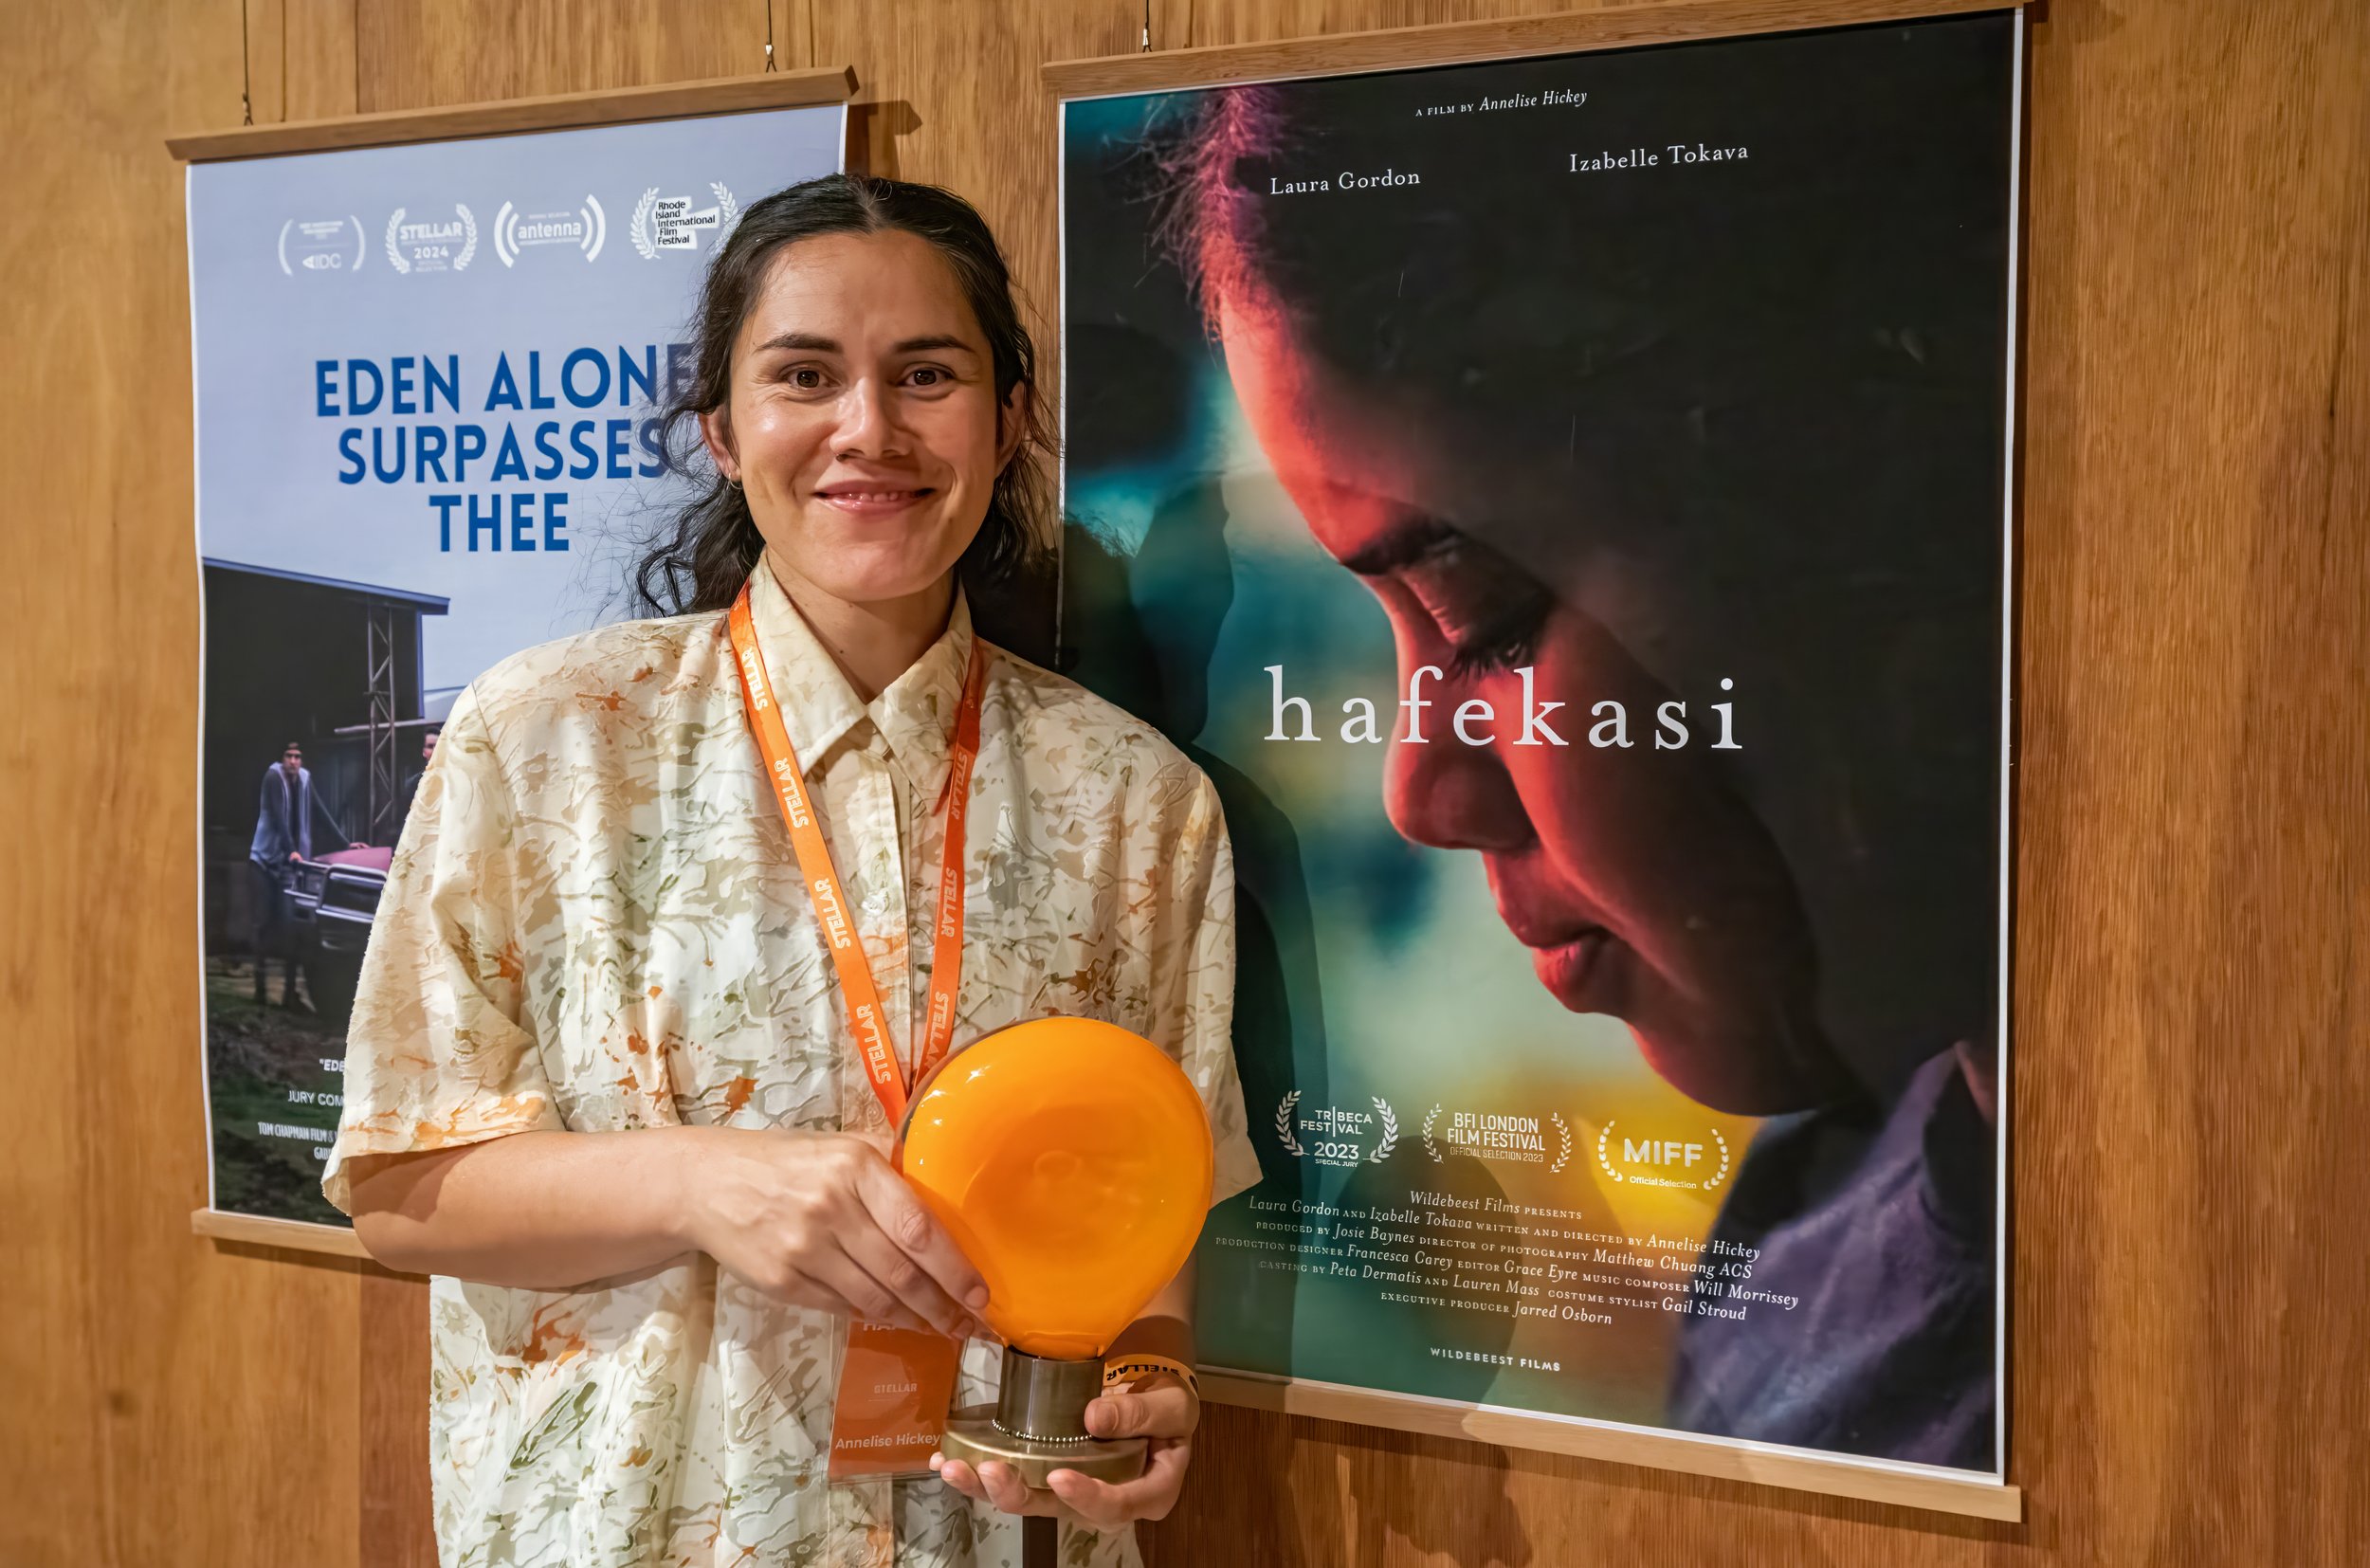  Annalise Hickey received the Best Film award for Hafekasi. 